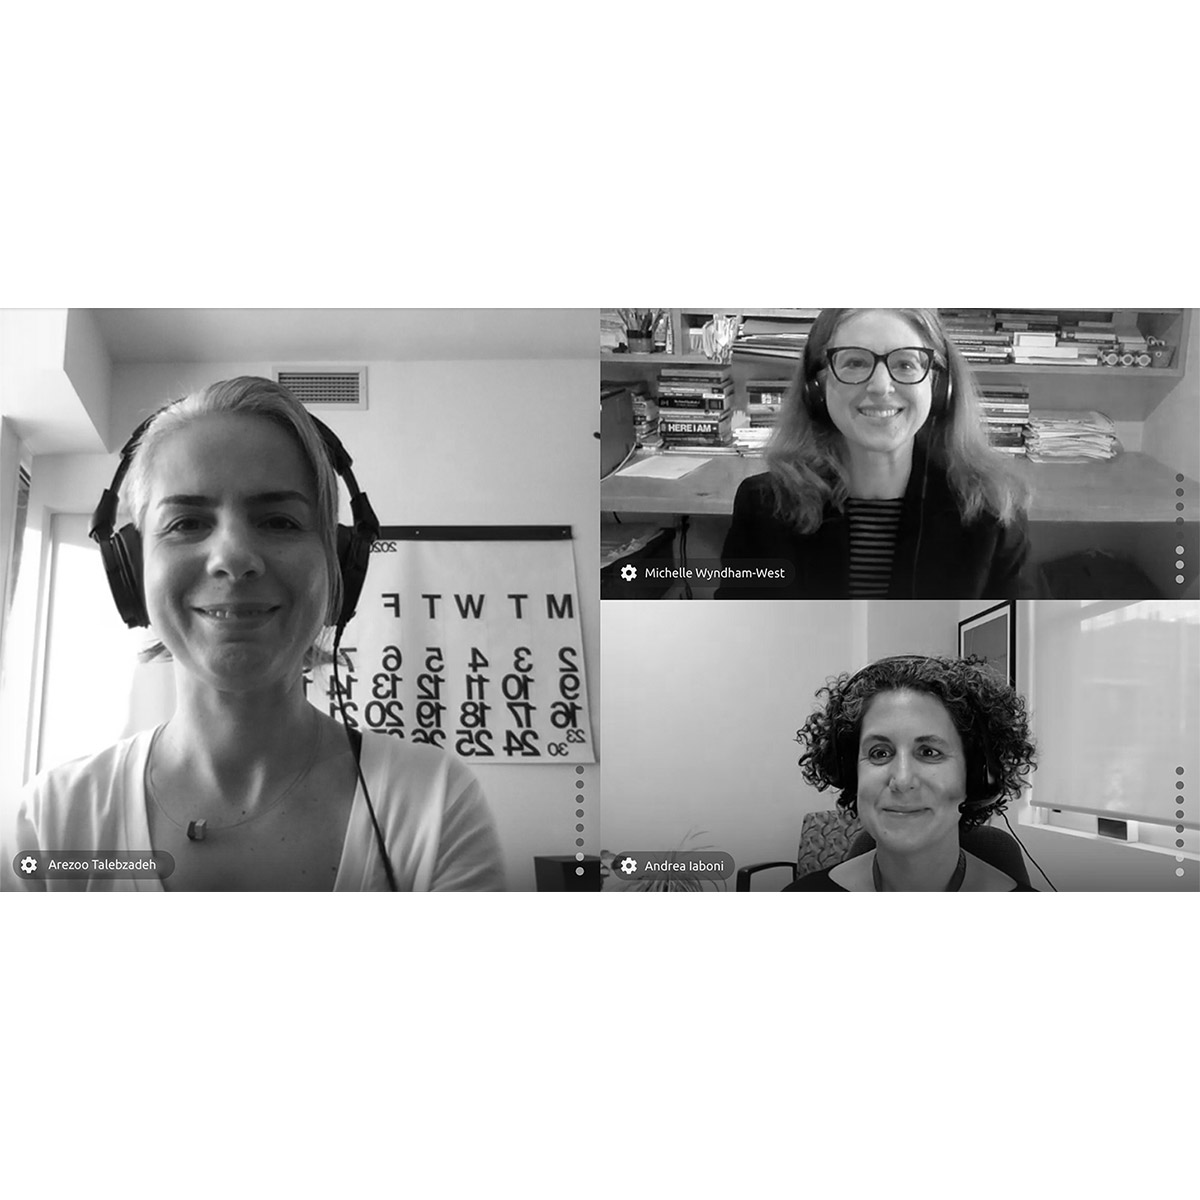 Portraits of Arezoo, Michelle and Andrea in an online meeting